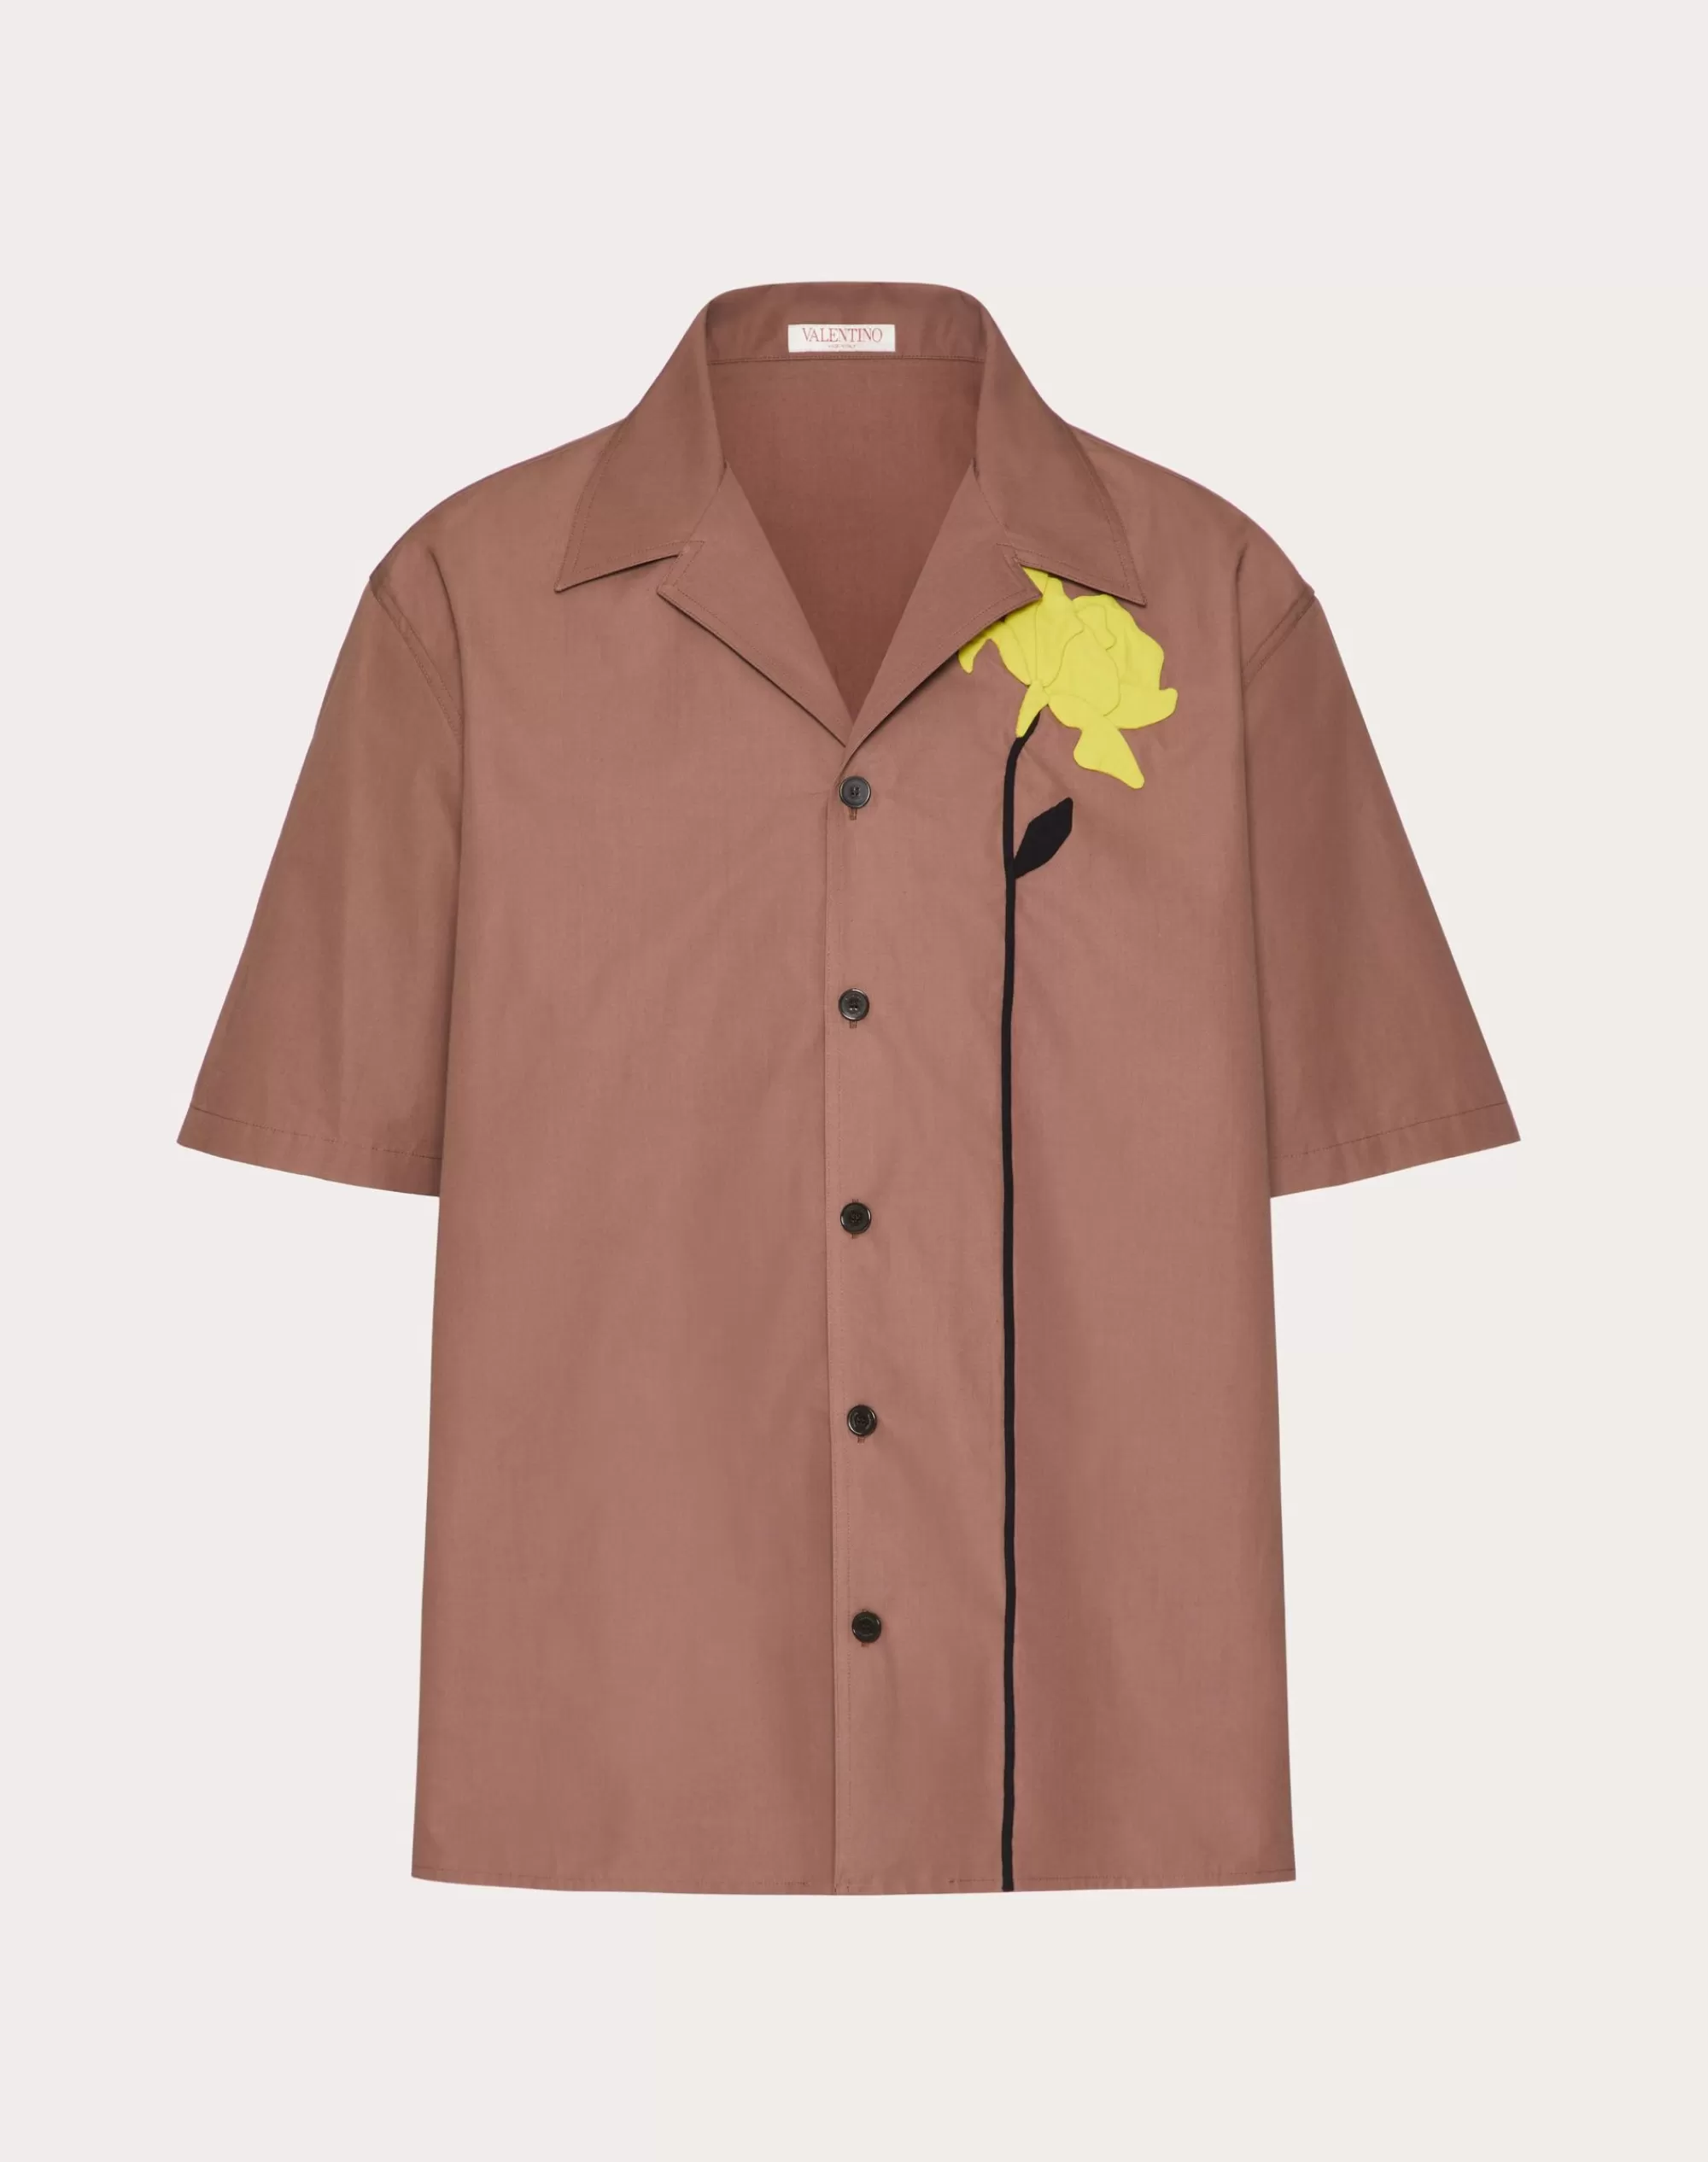 Valentino COTTON POPLIN BOWLING SHIRT WITH FLORAL CUT-OUT EMBROIDERY Mauve Hot